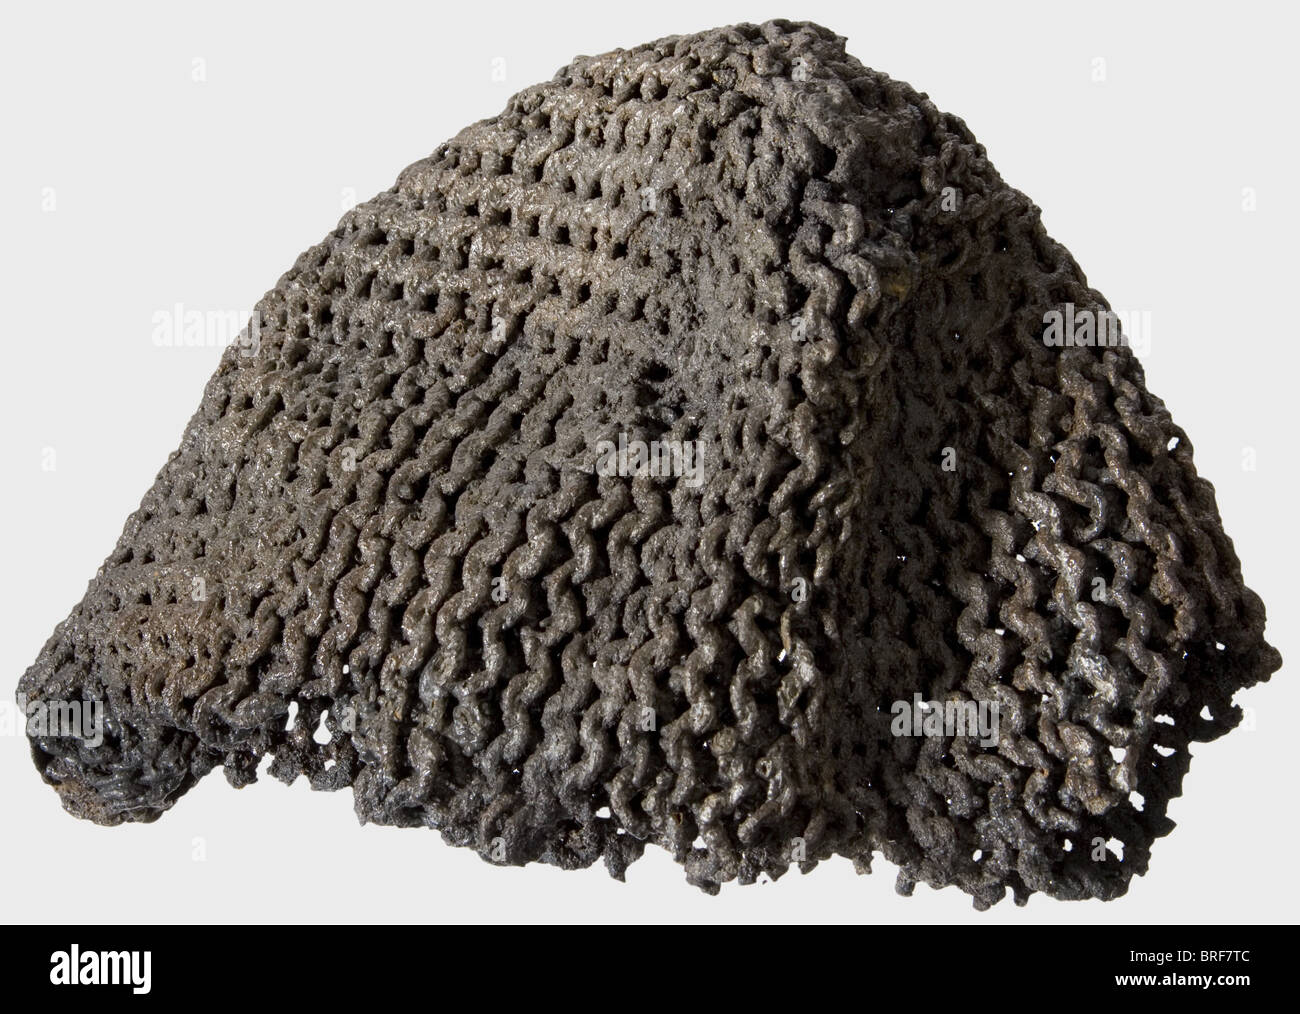 A Mongolian helmet and chain mail coif, Period of the Golden Horde, 14th century,. Made of four embossed, overlapping iron segments riveted together. Obvious damage, especially on the lower rim, and the riveting is loose at the top. Otherwise the metal is quite well preserved. Height 17 cm. Weight 615 g. Conserved condition as discovered. It comes with a fragment of an iron mail coif, solidified with corrosion, cleaned, and conserved. Height 17 cm. Weight 818 g. Cf. two Mongolian helmets of identical provenance: Hermann Historica, auction 49, 19 October 2005, l, Stock Photo